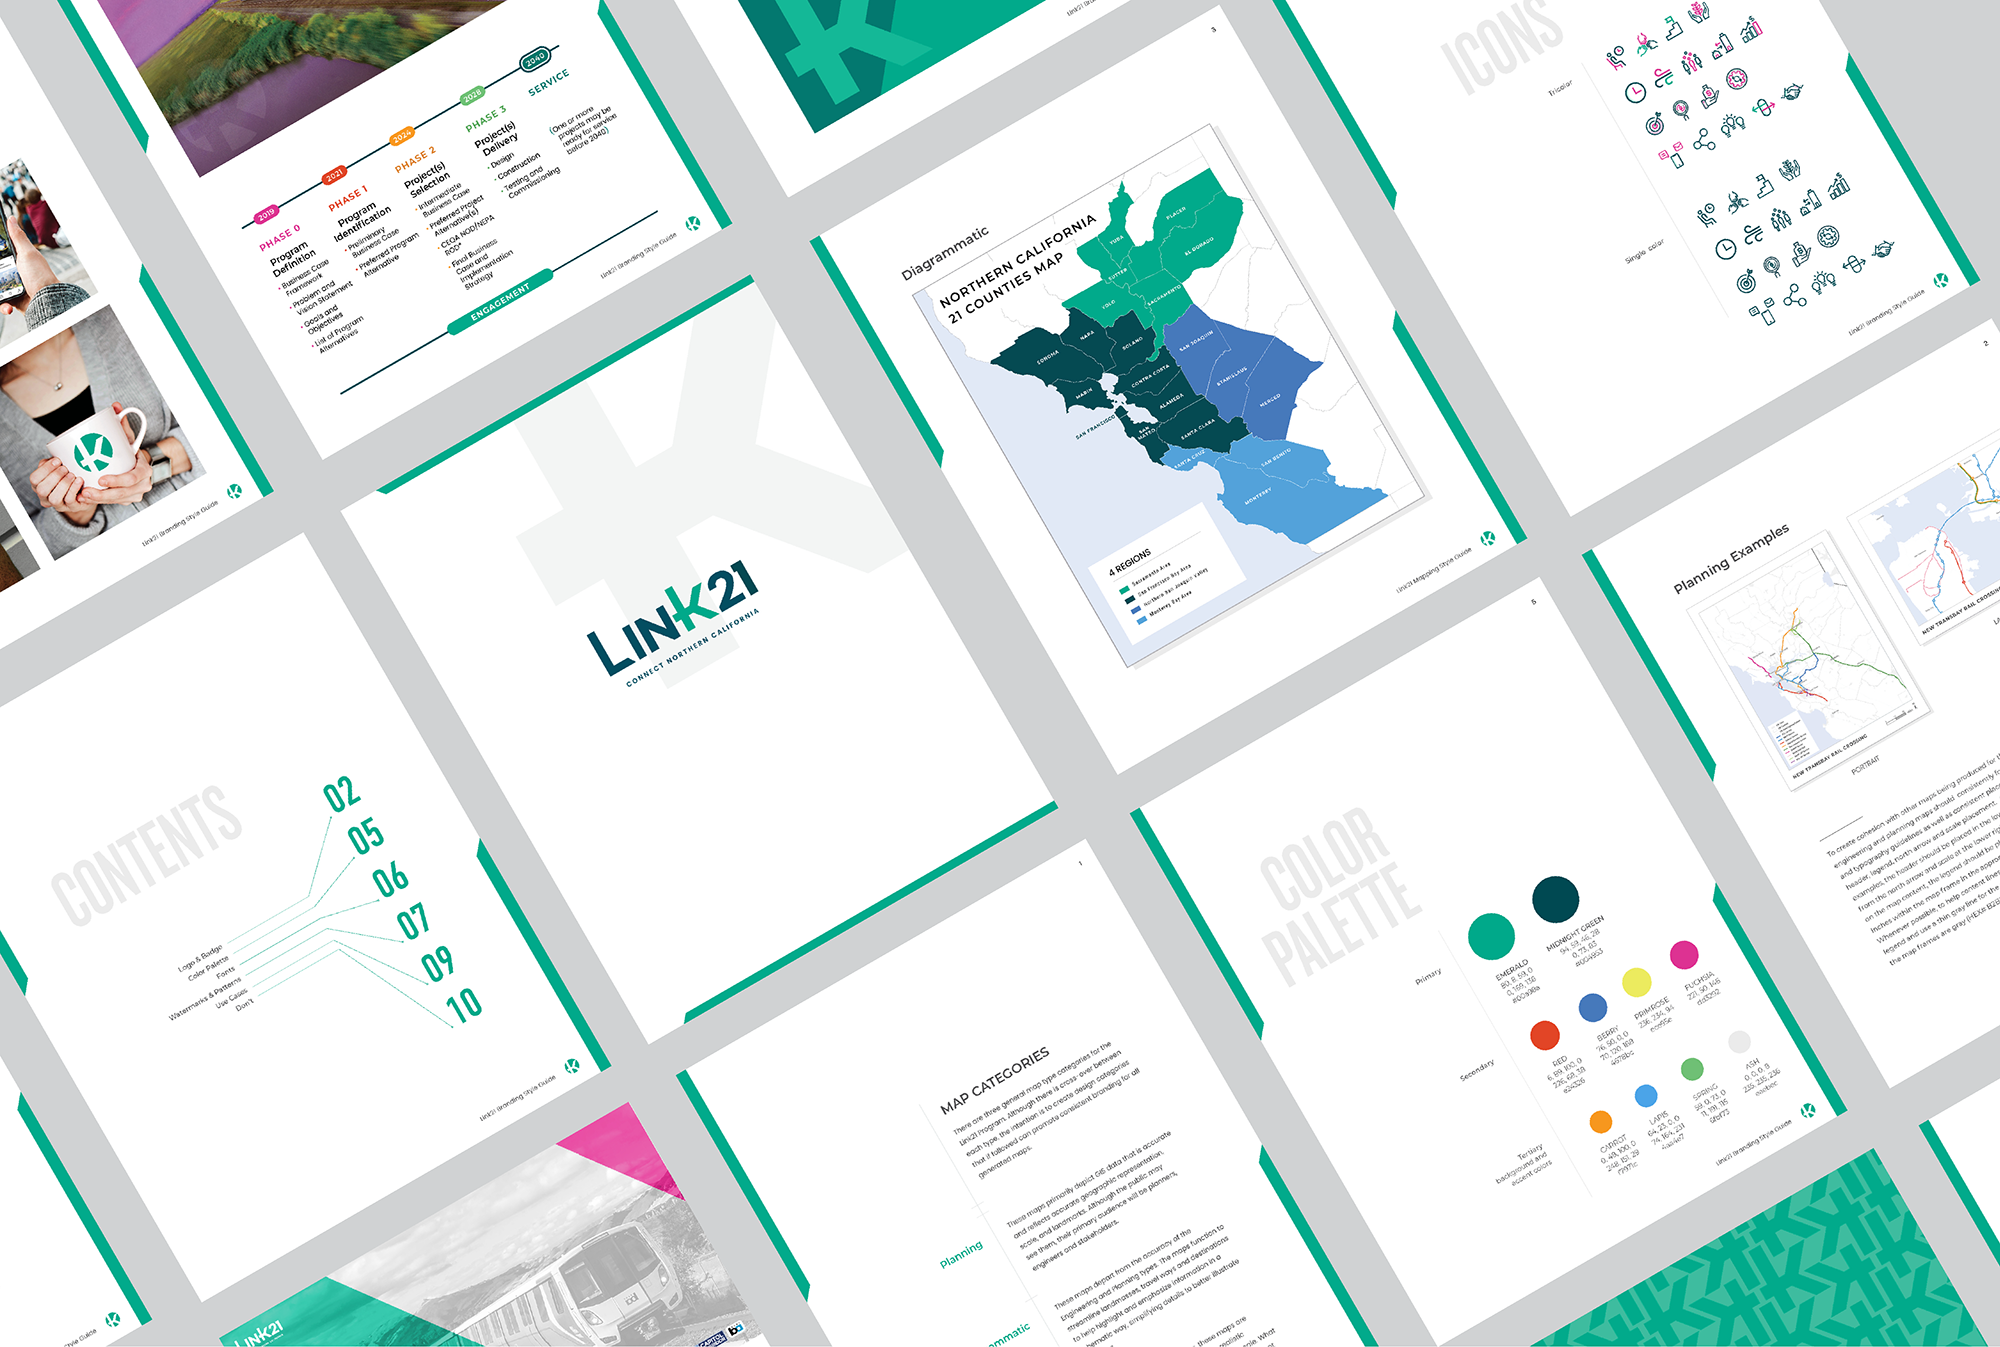 Link21 branding campaign collateral